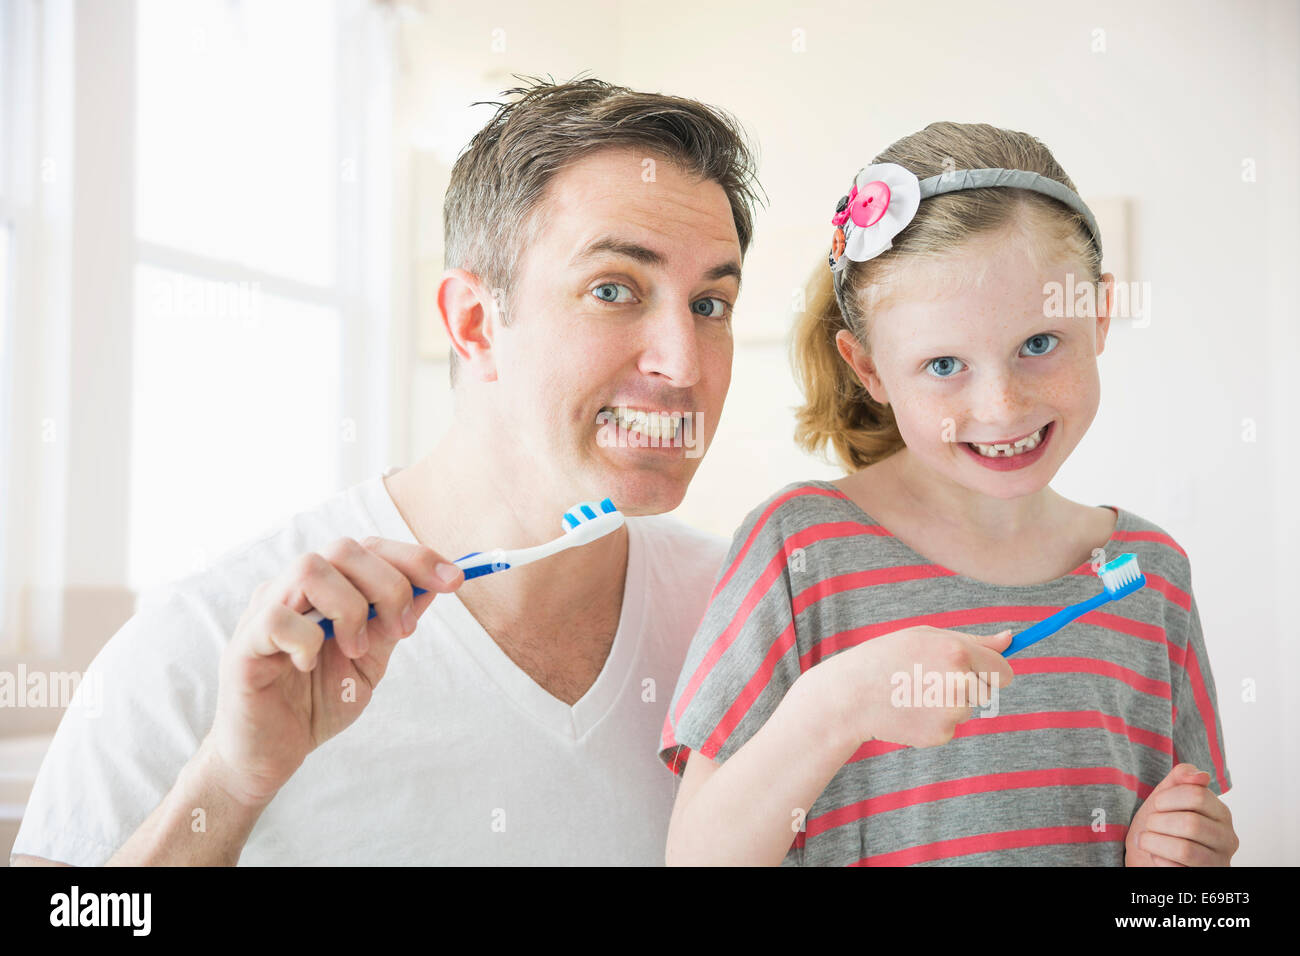 Caucasian father and daughter brushing their teeth Stock Photo